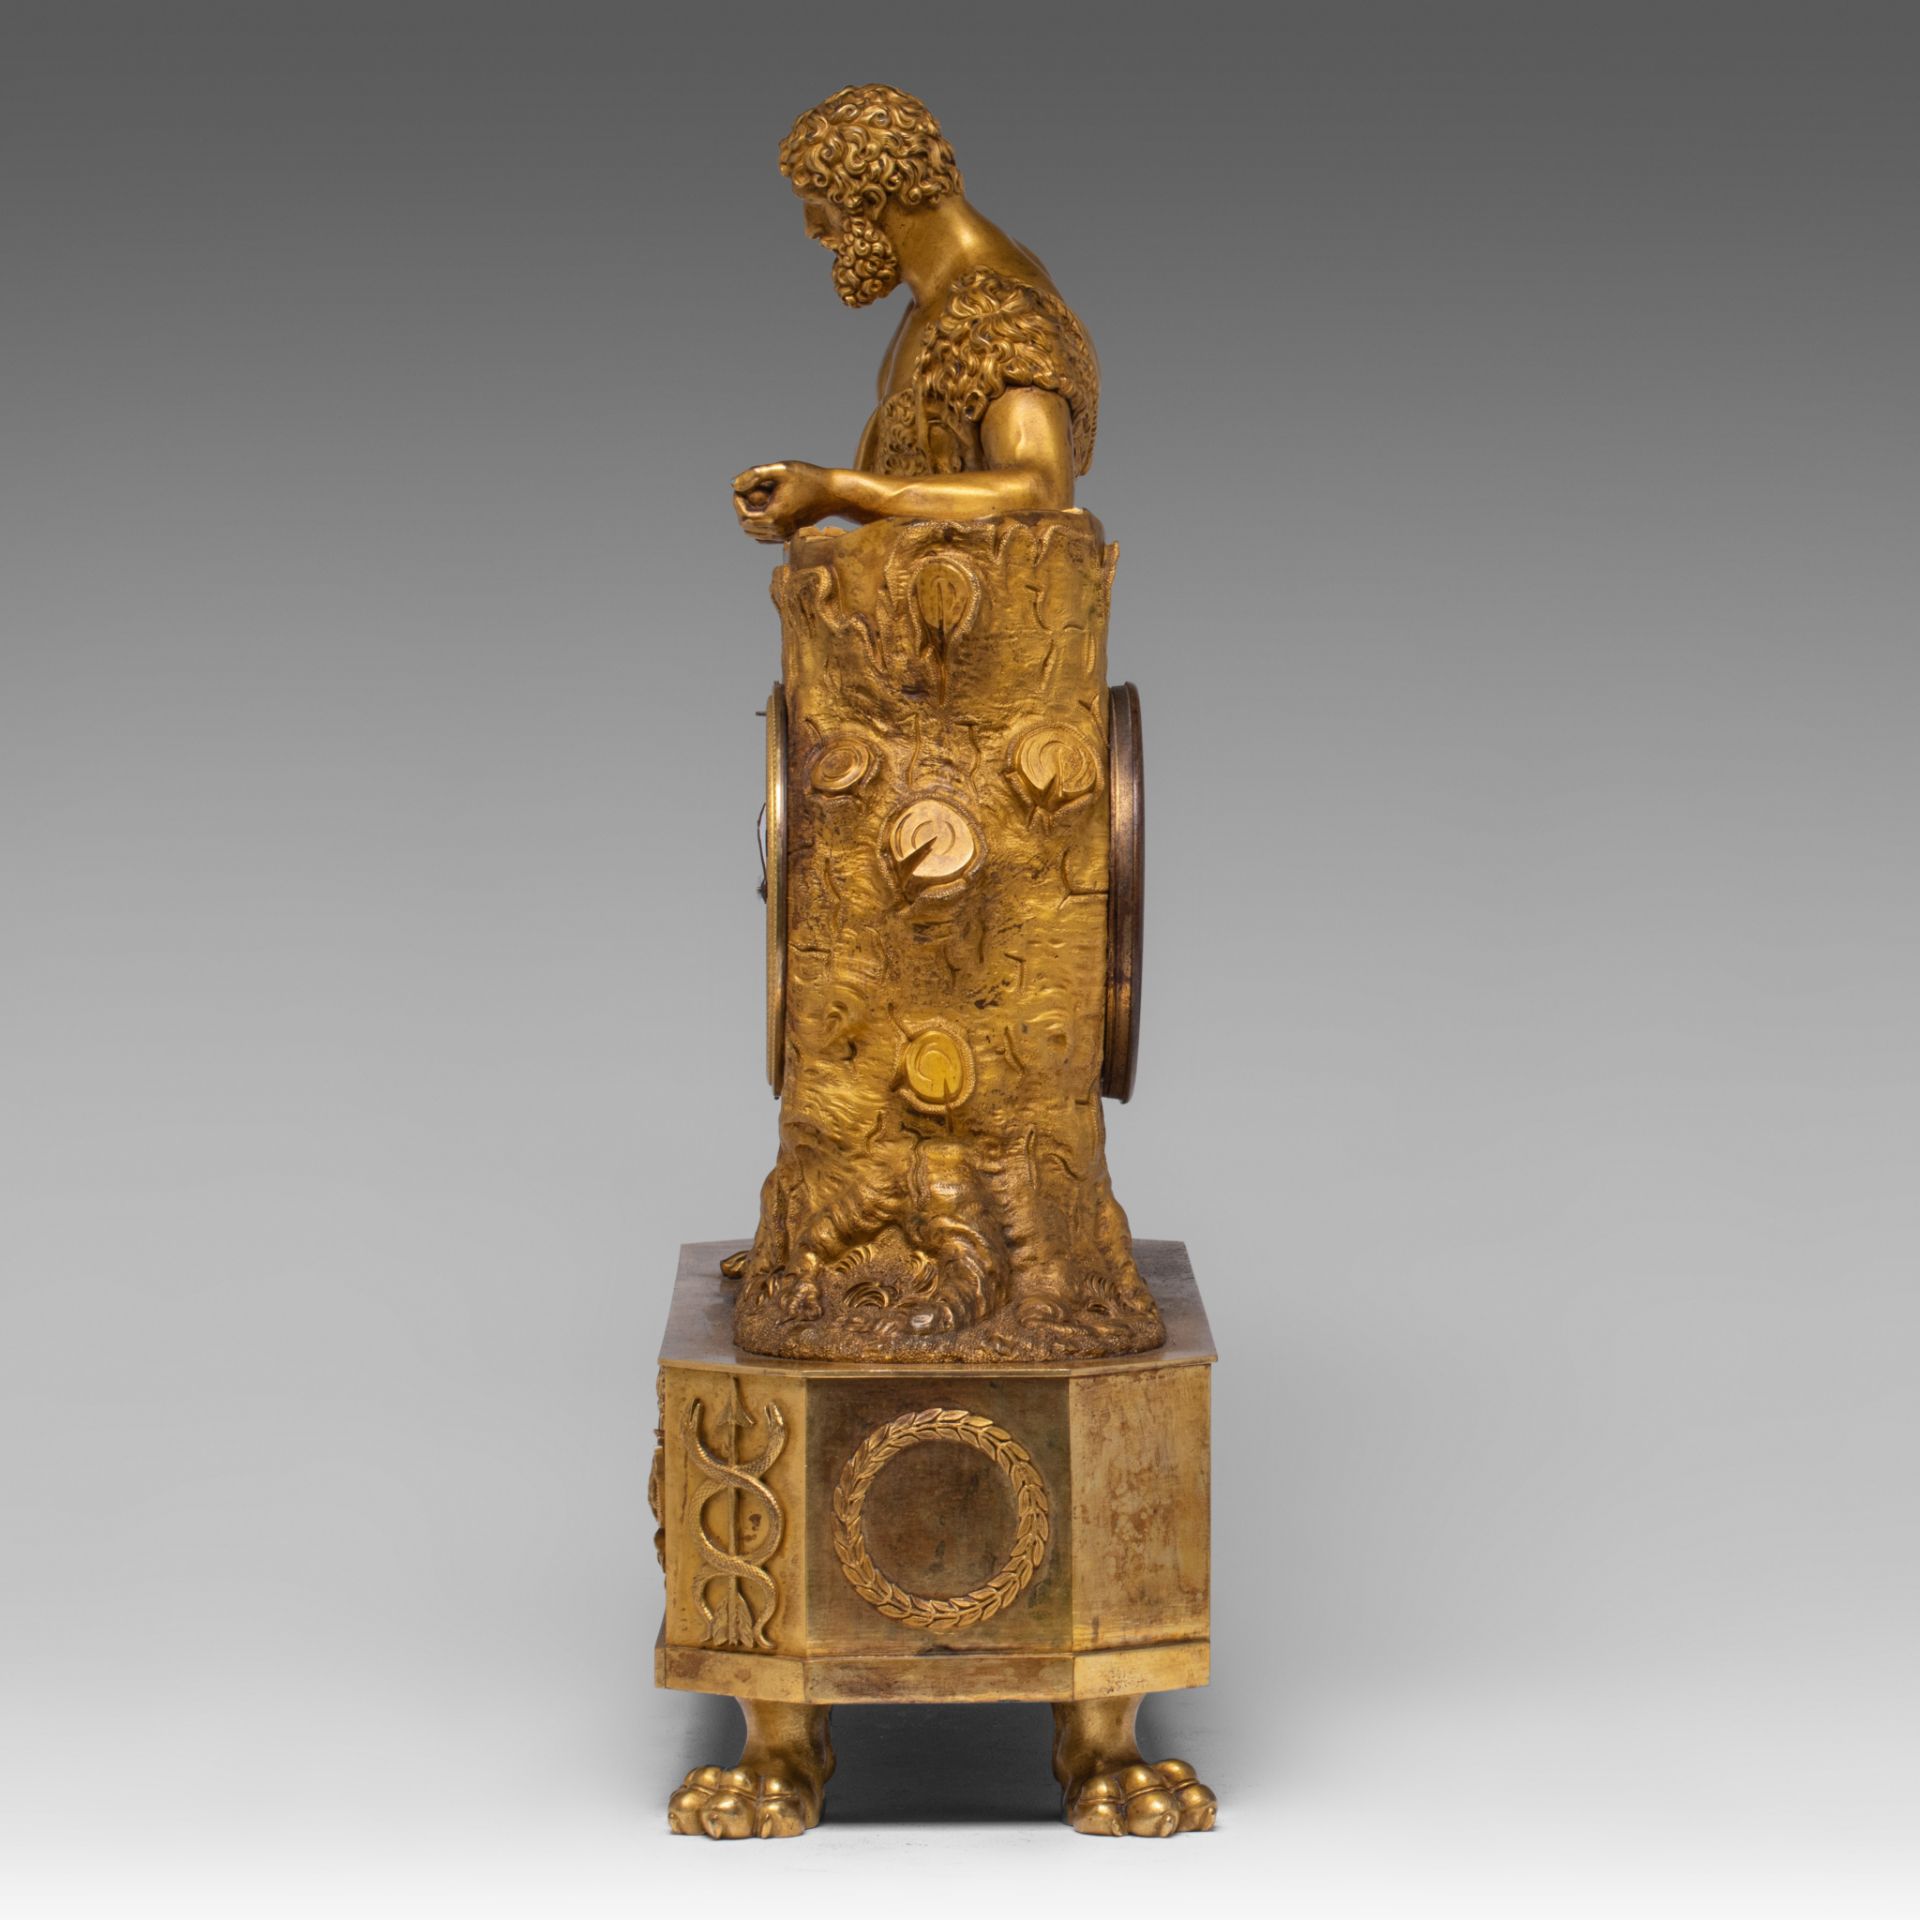 A French Empire gilt bronze mantle clock with Hercules, H 49 cm - Image 3 of 8